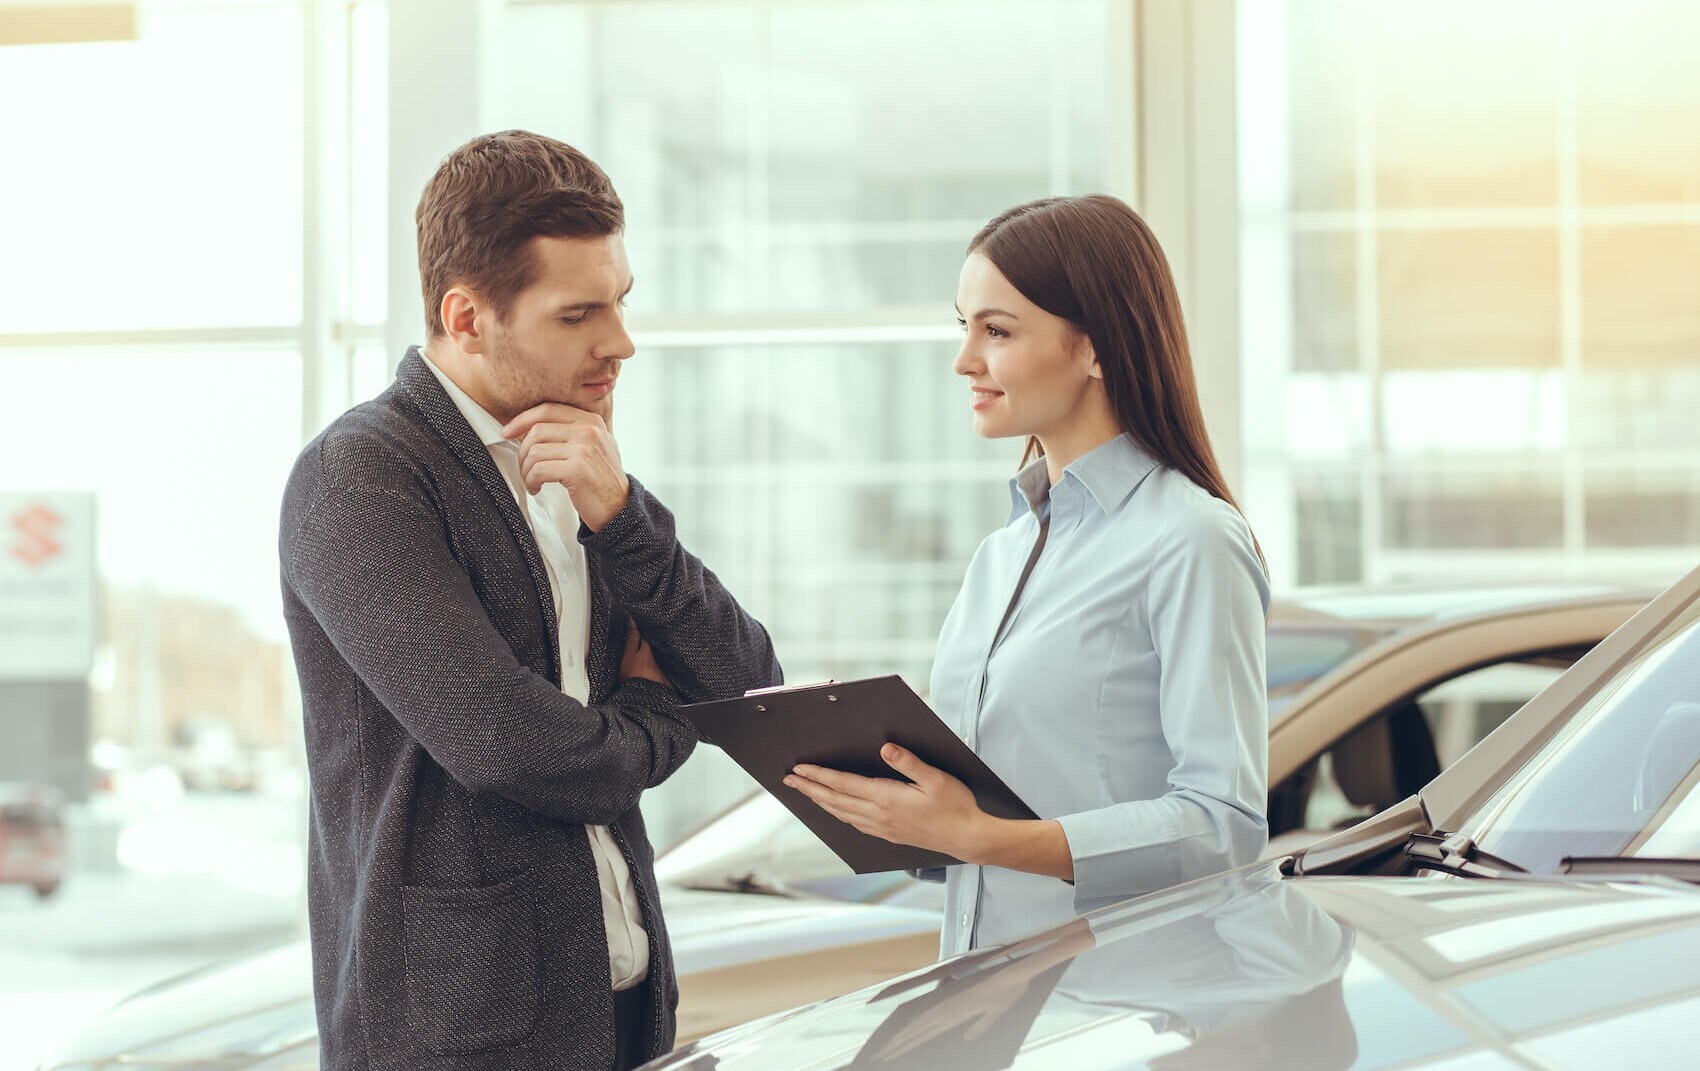 Sales person speaking to customer over paperwork next to car